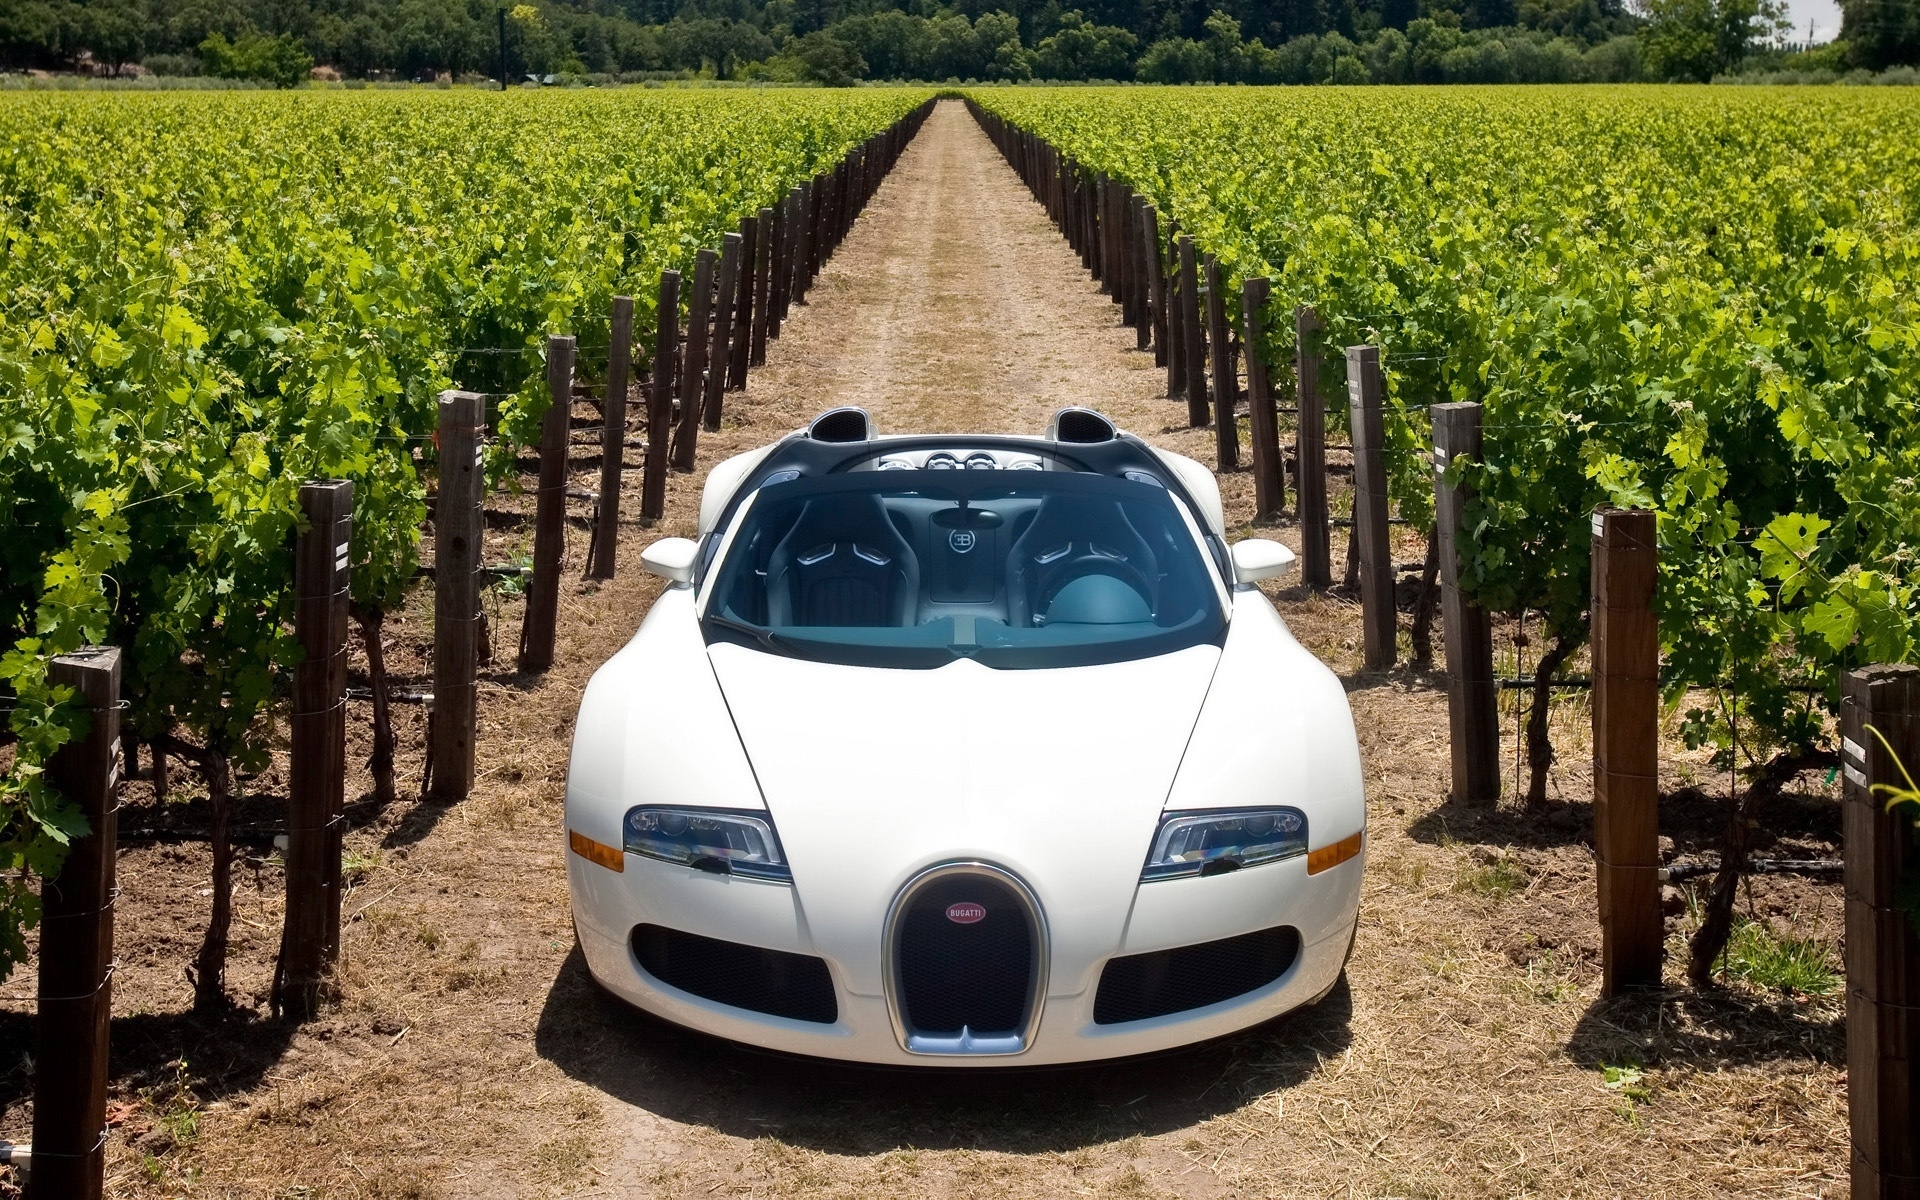 Bugatti Veyron 16.4 Grand Sport 2010 in Napa Valley - Front 2 for 1920 x 1200 widescreen resolution